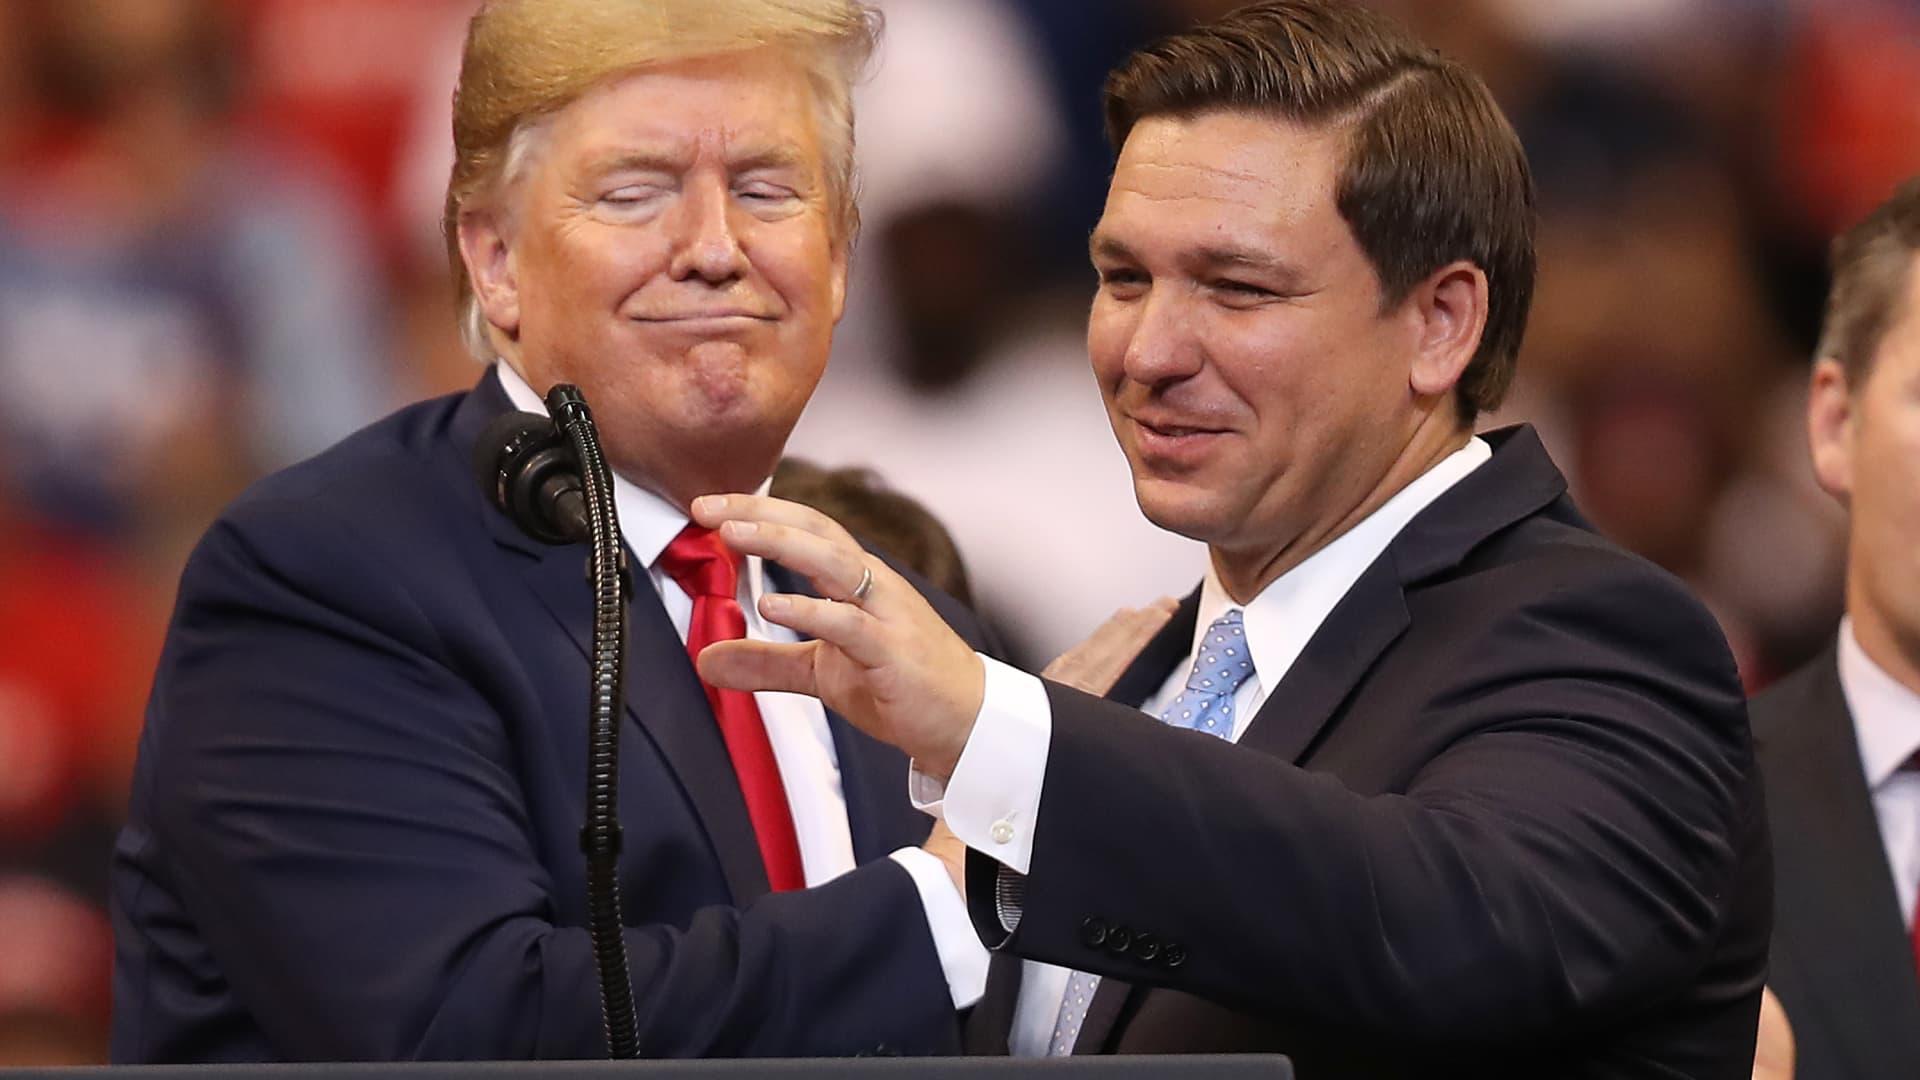 Trump, DeSantis go head-to-head at key conservative group summits in DC